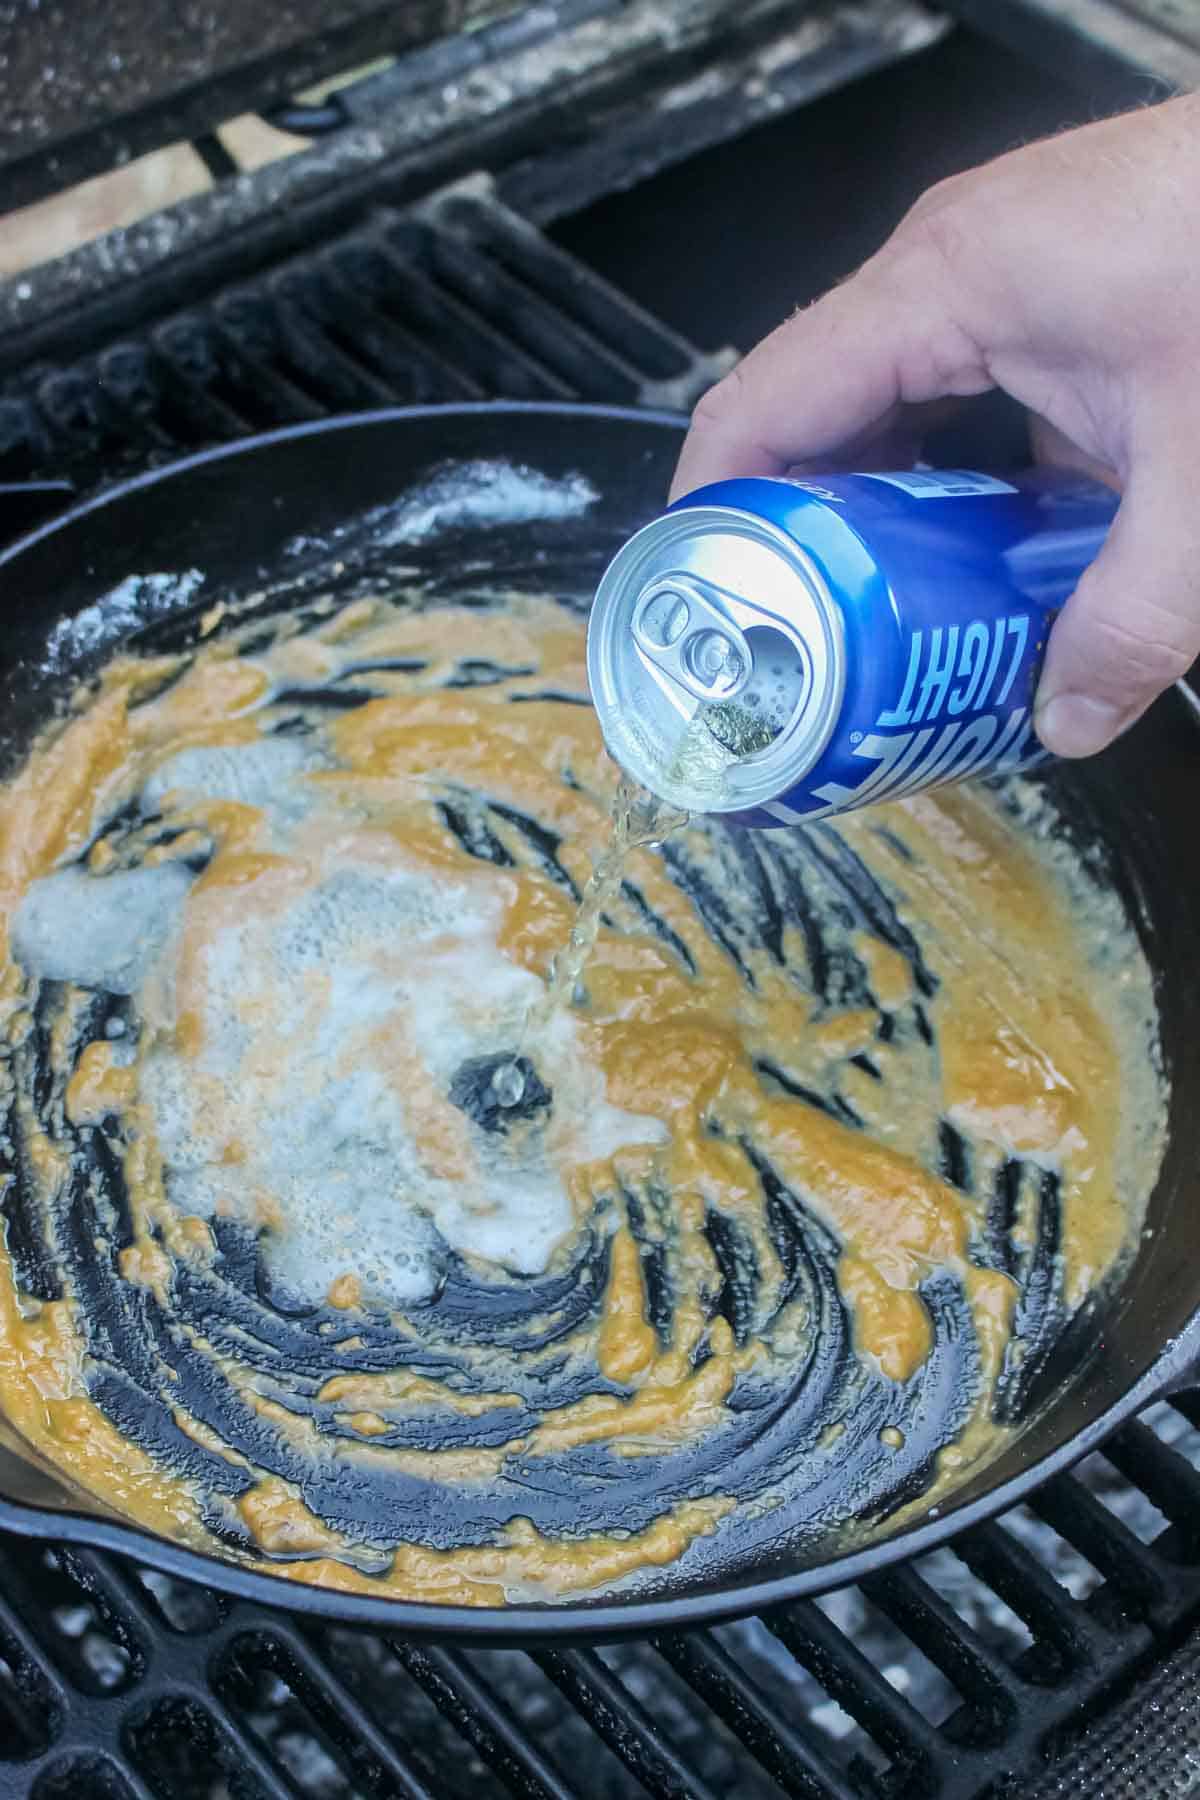 Adding the Keystone Light for the Beer Cheese